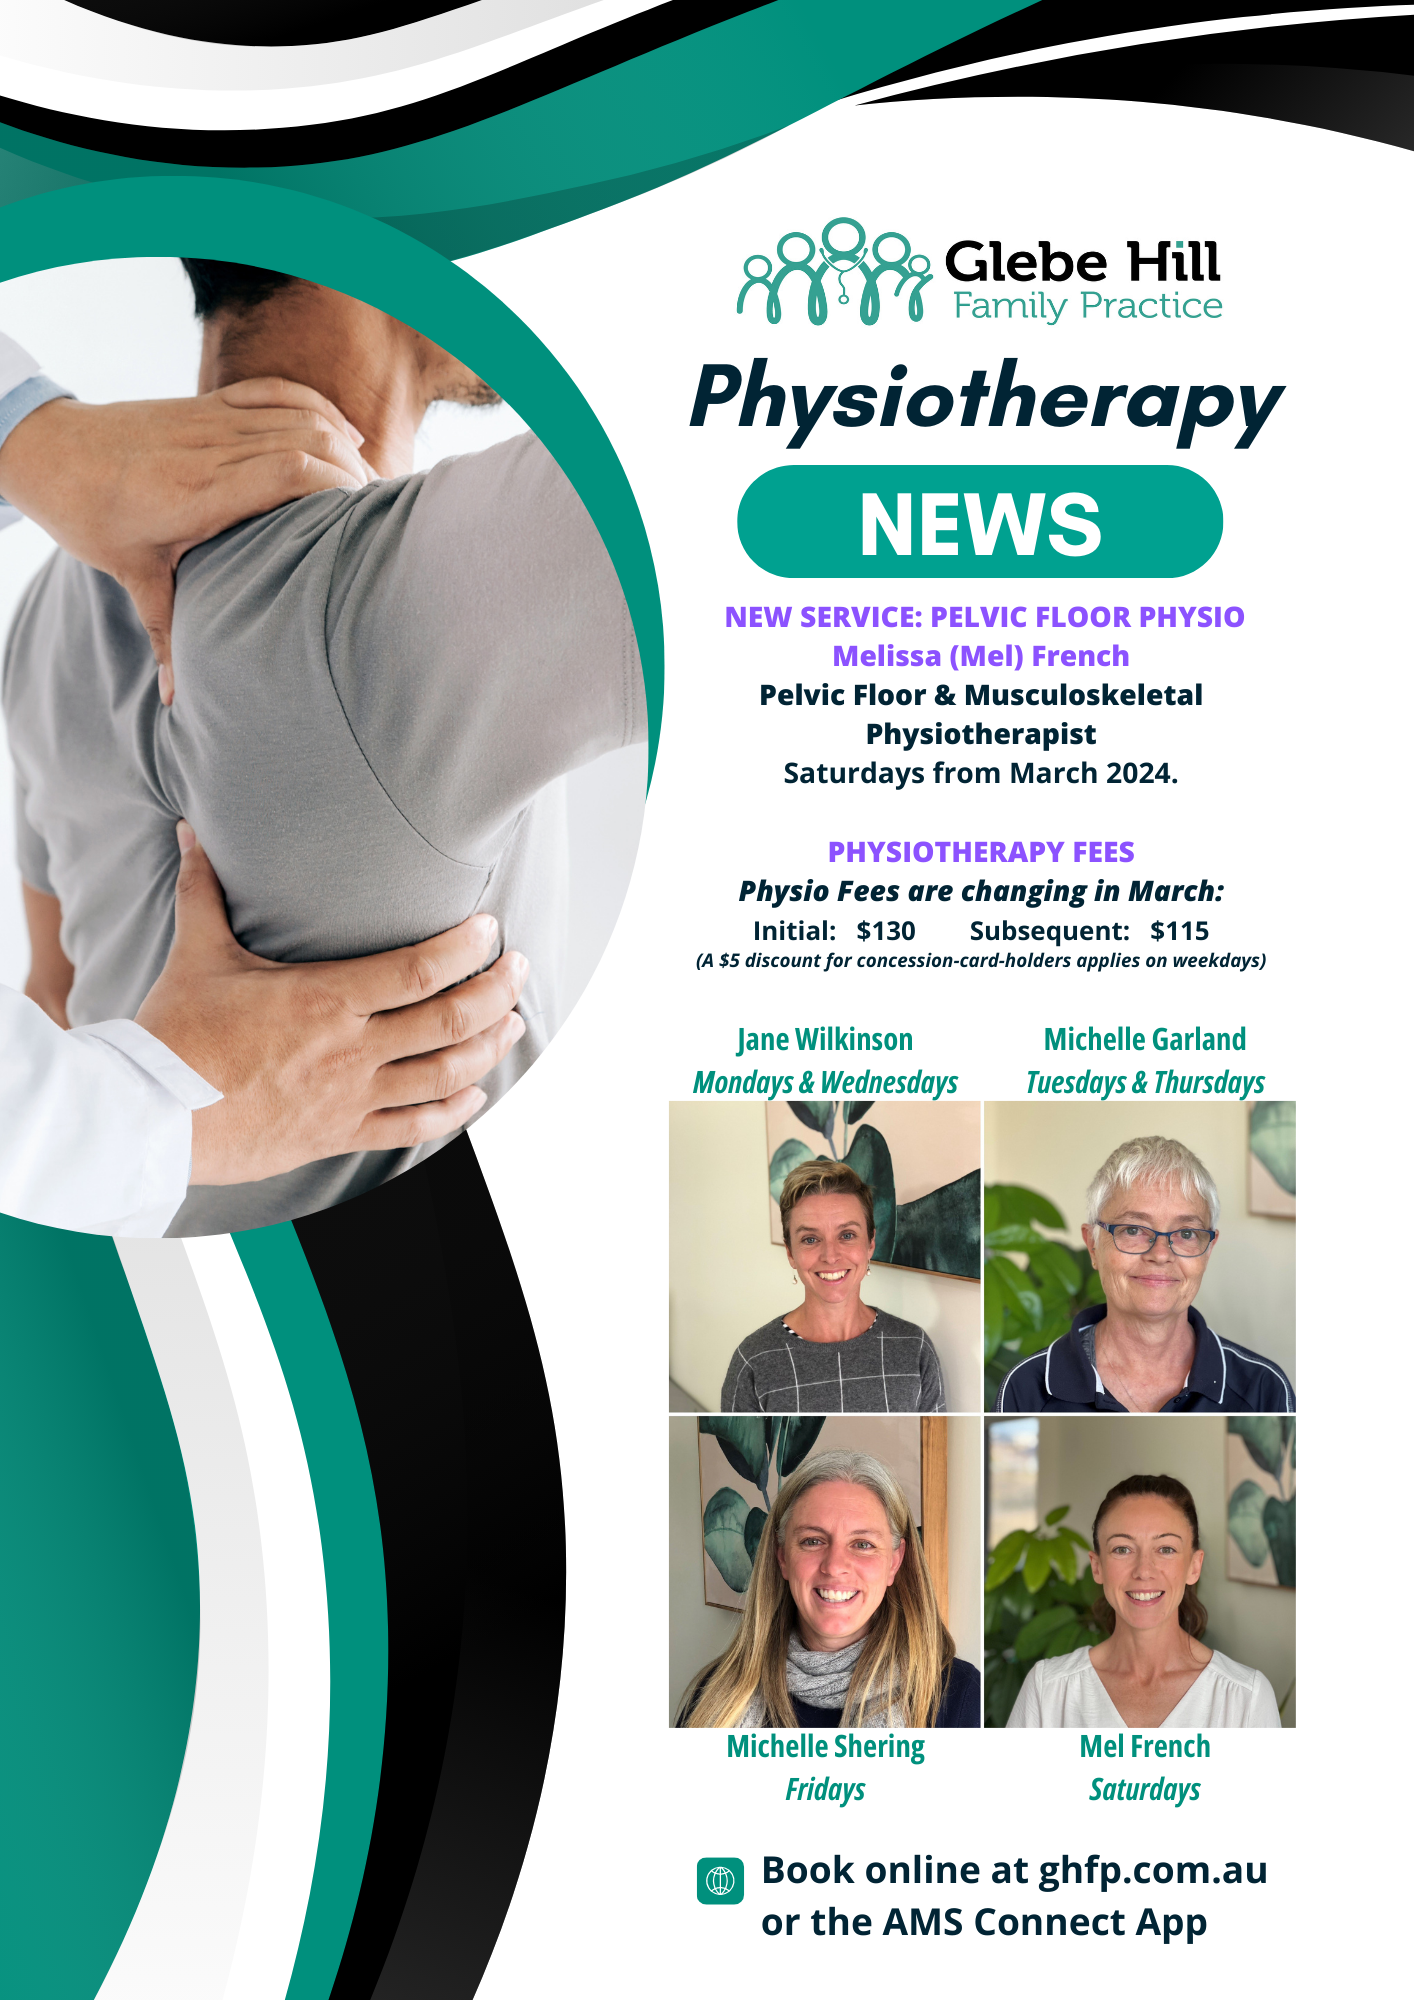 GHFP - Physiotherapy News March 2024